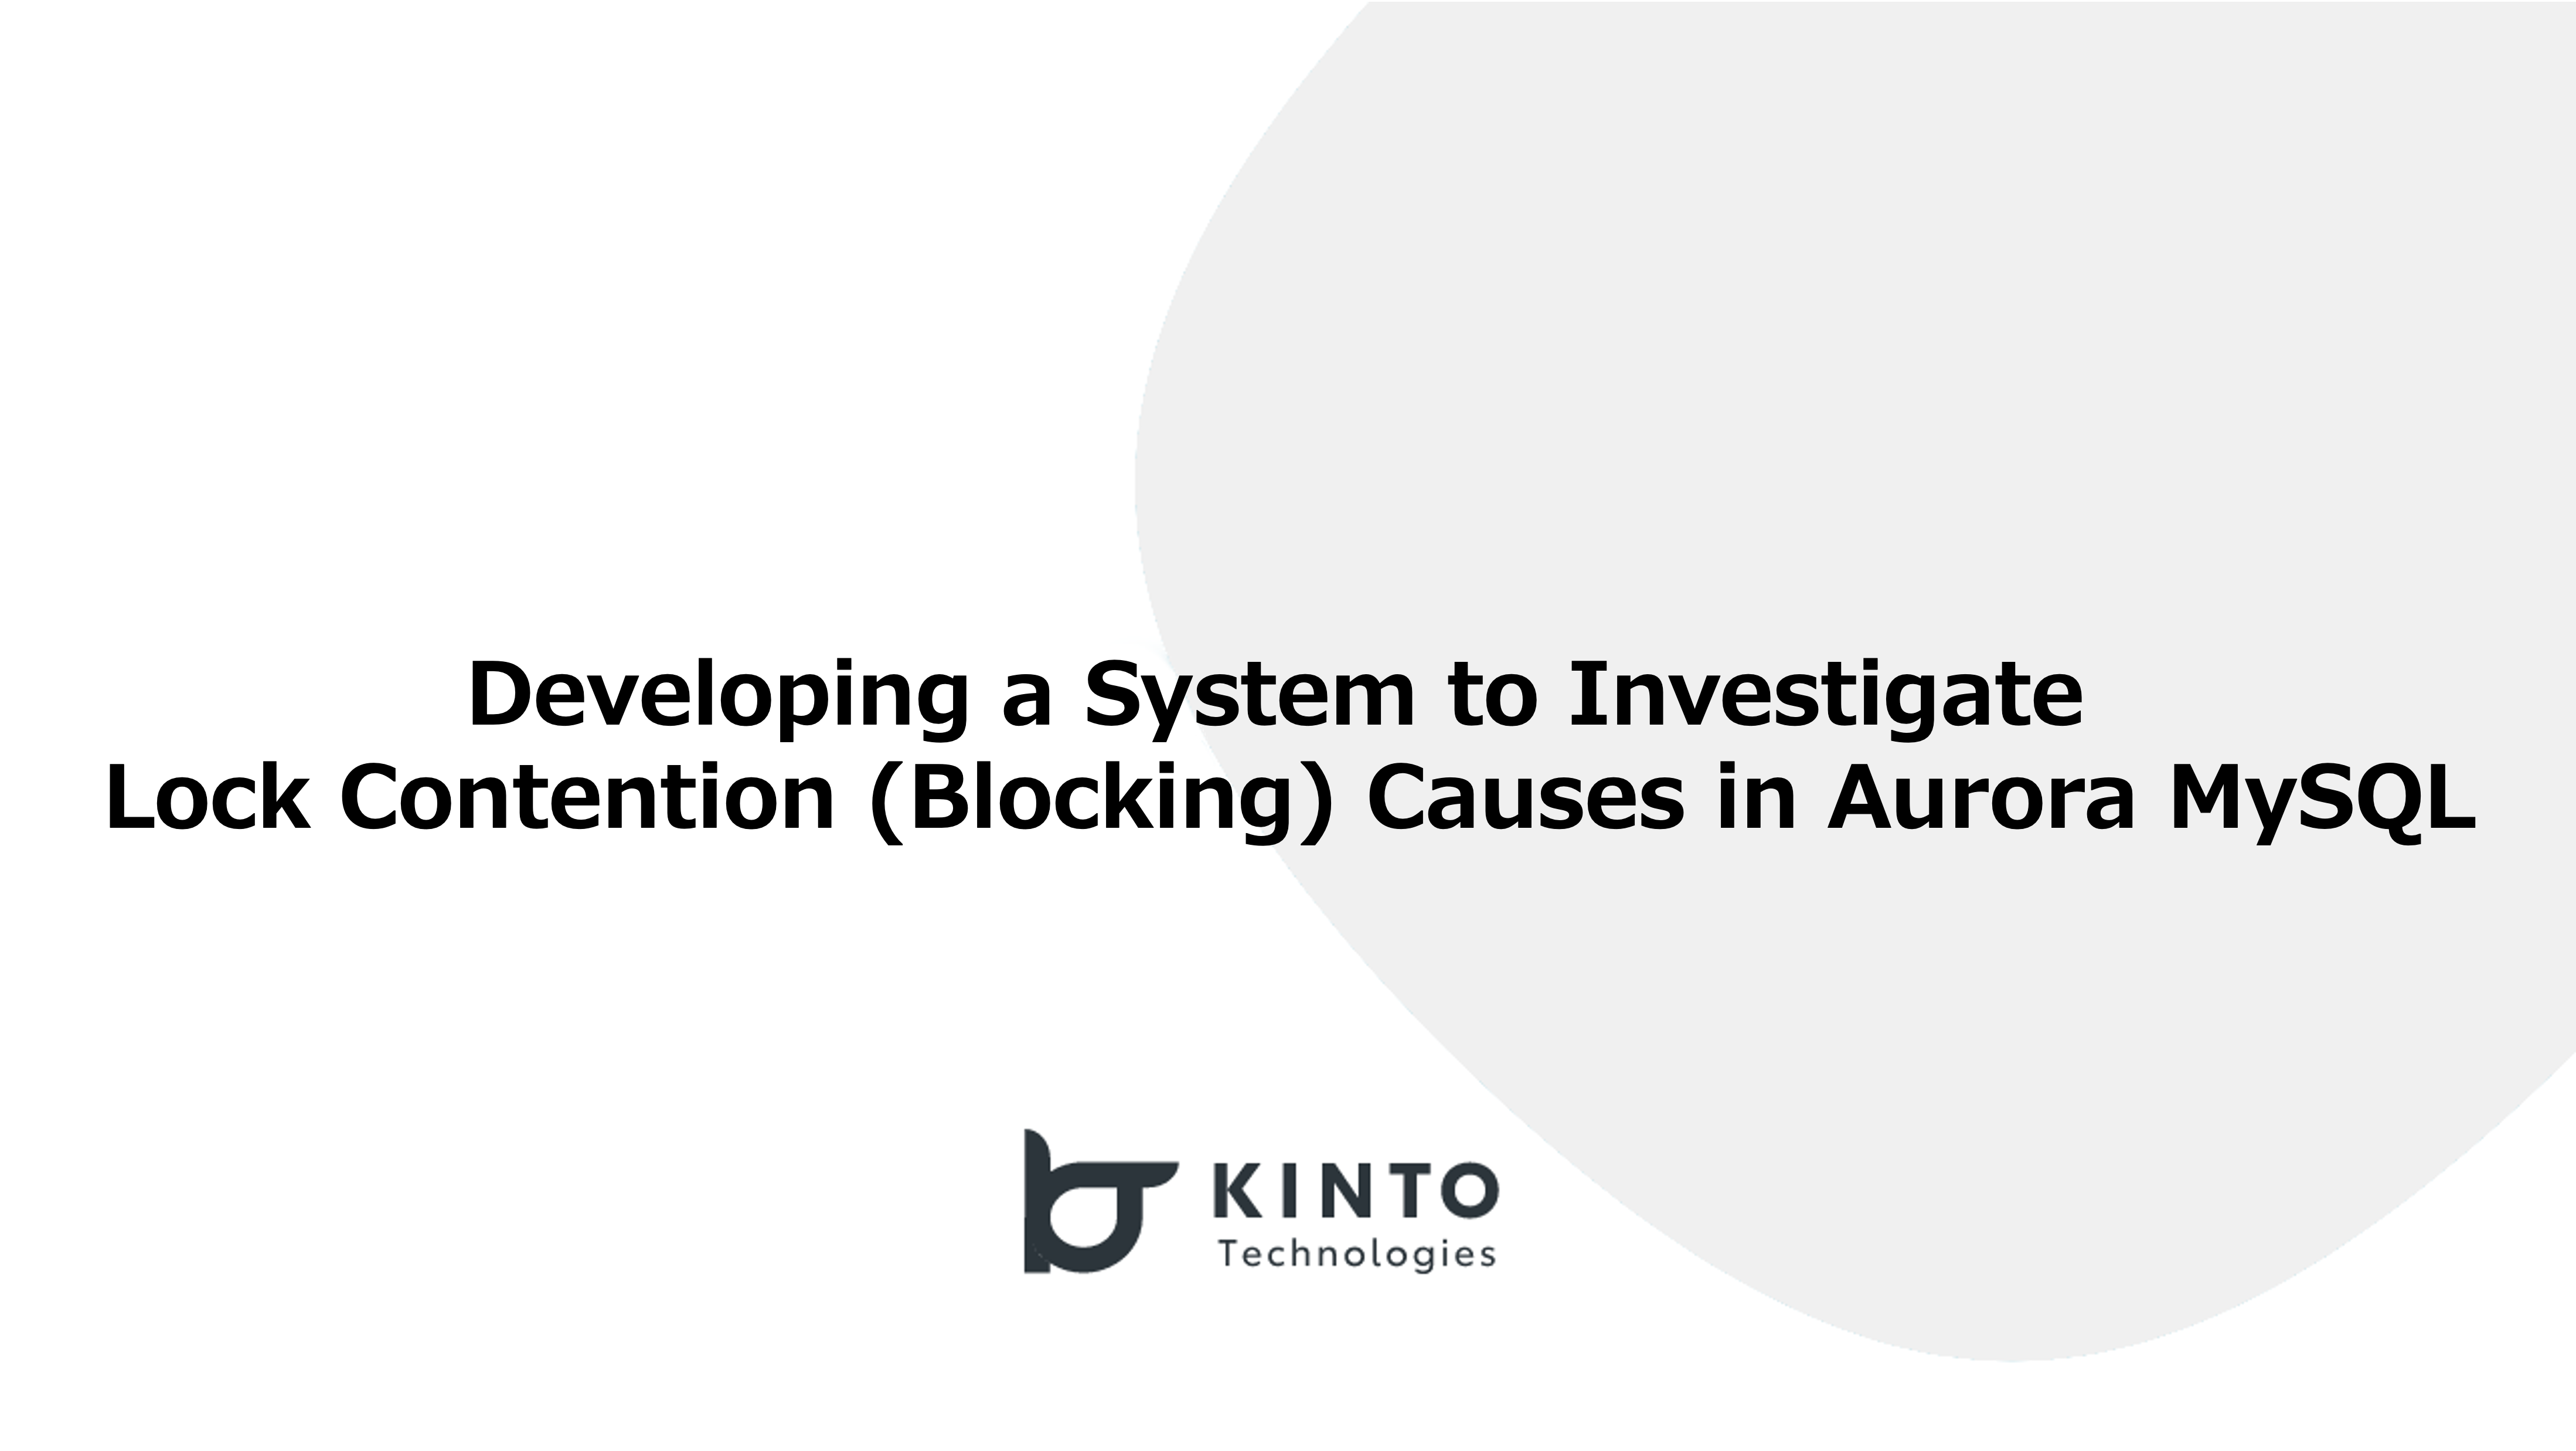 Cover Image for Developing a System to Investigate Lock Contention (Blocking) Causes in Aurora MySQL